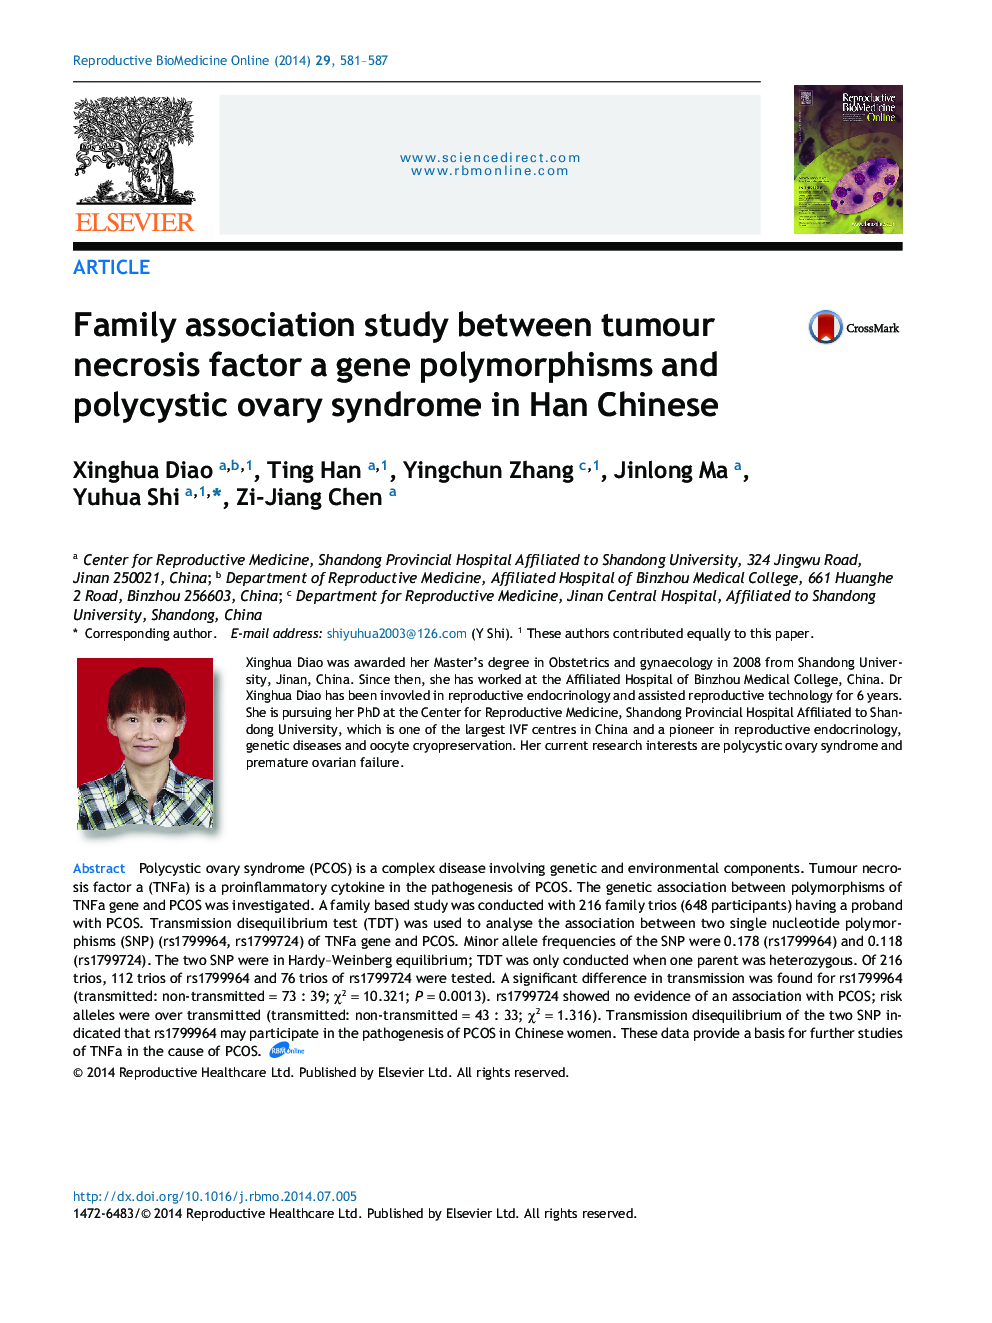 Family association study between tumour necrosis factor a gene polymorphisms and polycystic ovary syndrome in Han Chinese